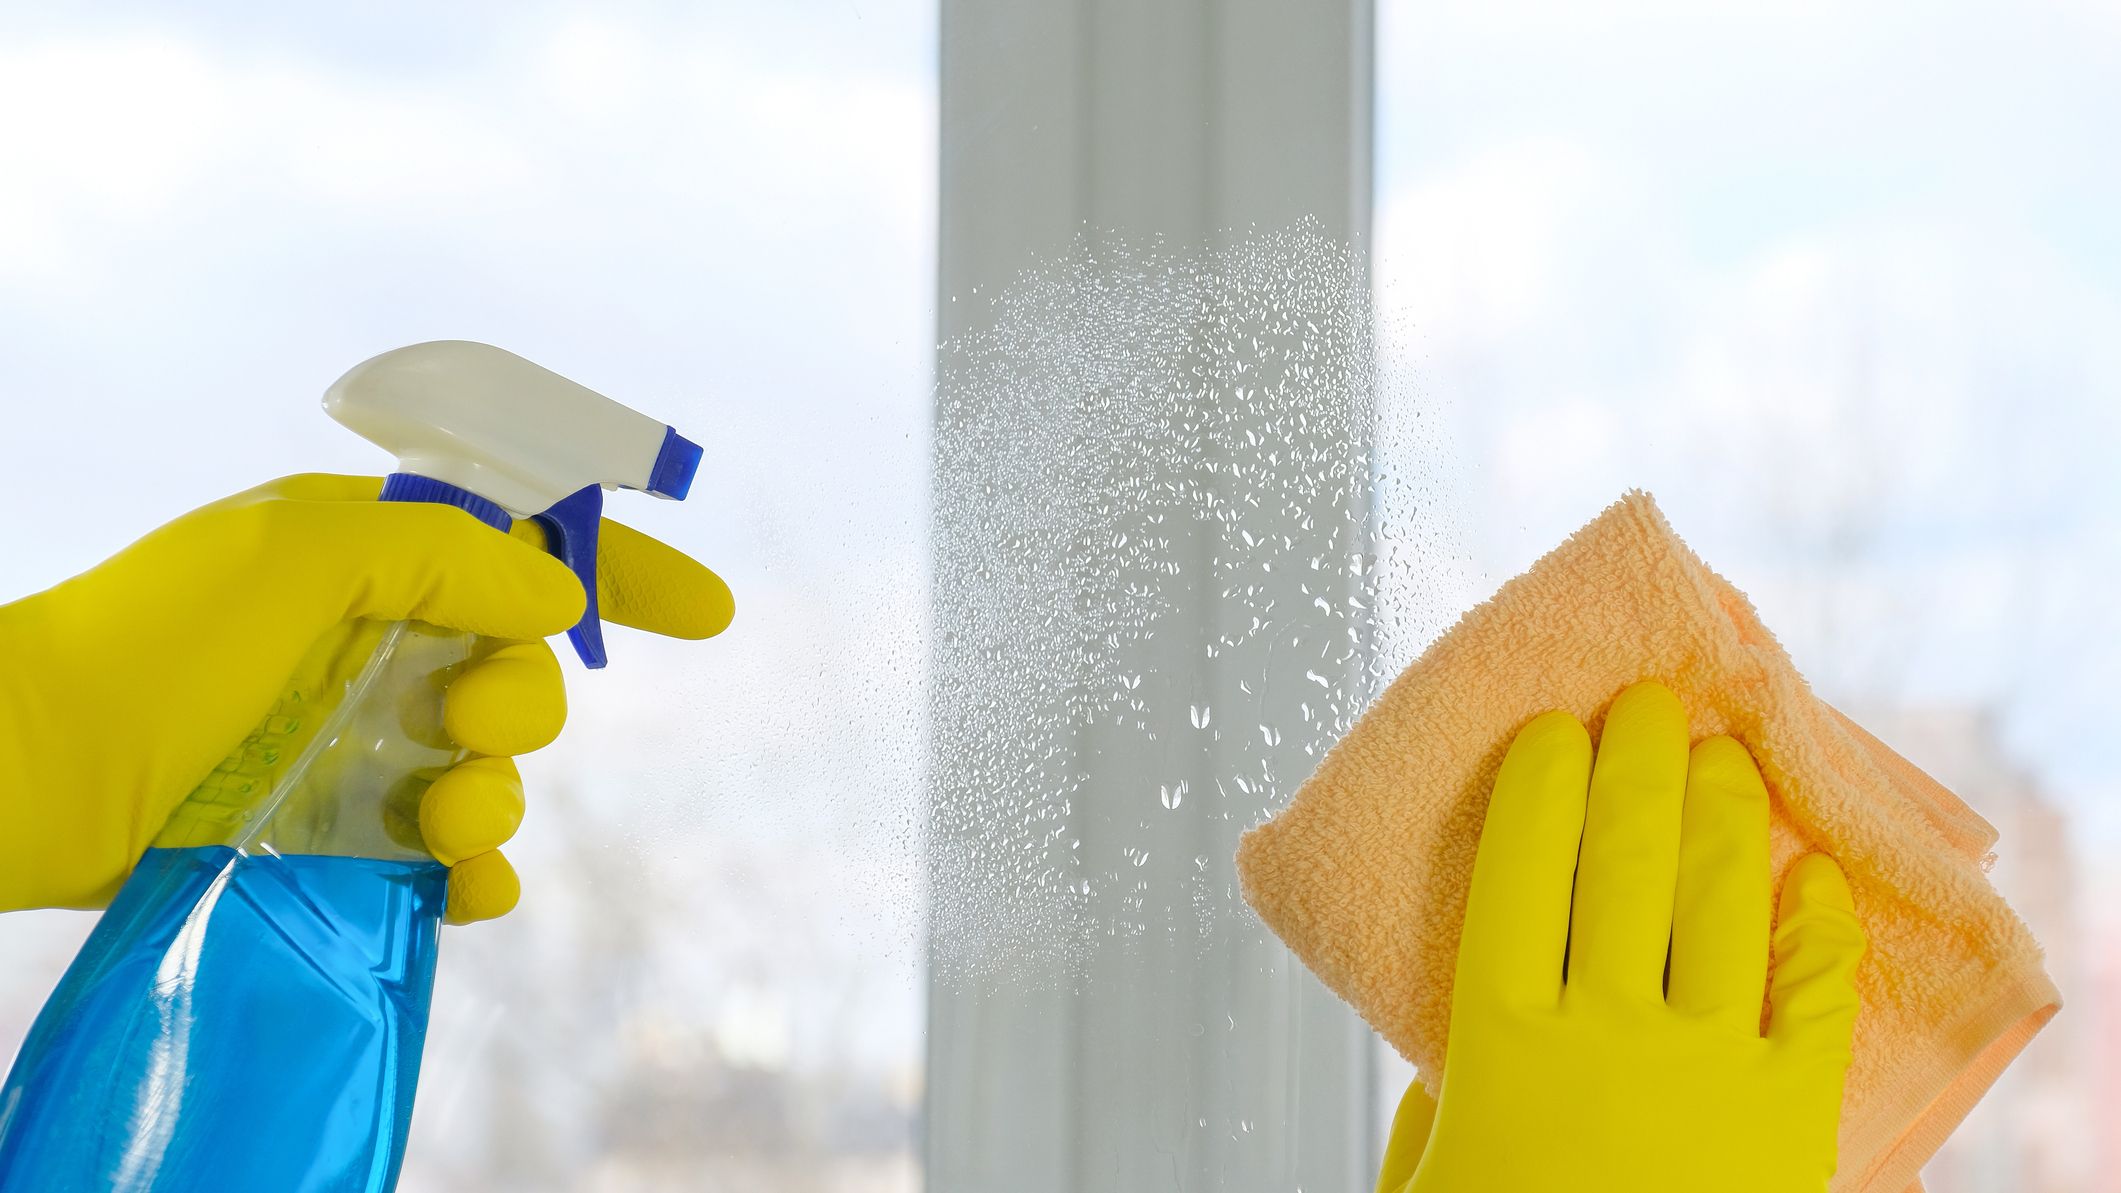 I Tried the Cut-Up Sponge Trick for Cleaning Window Tracks